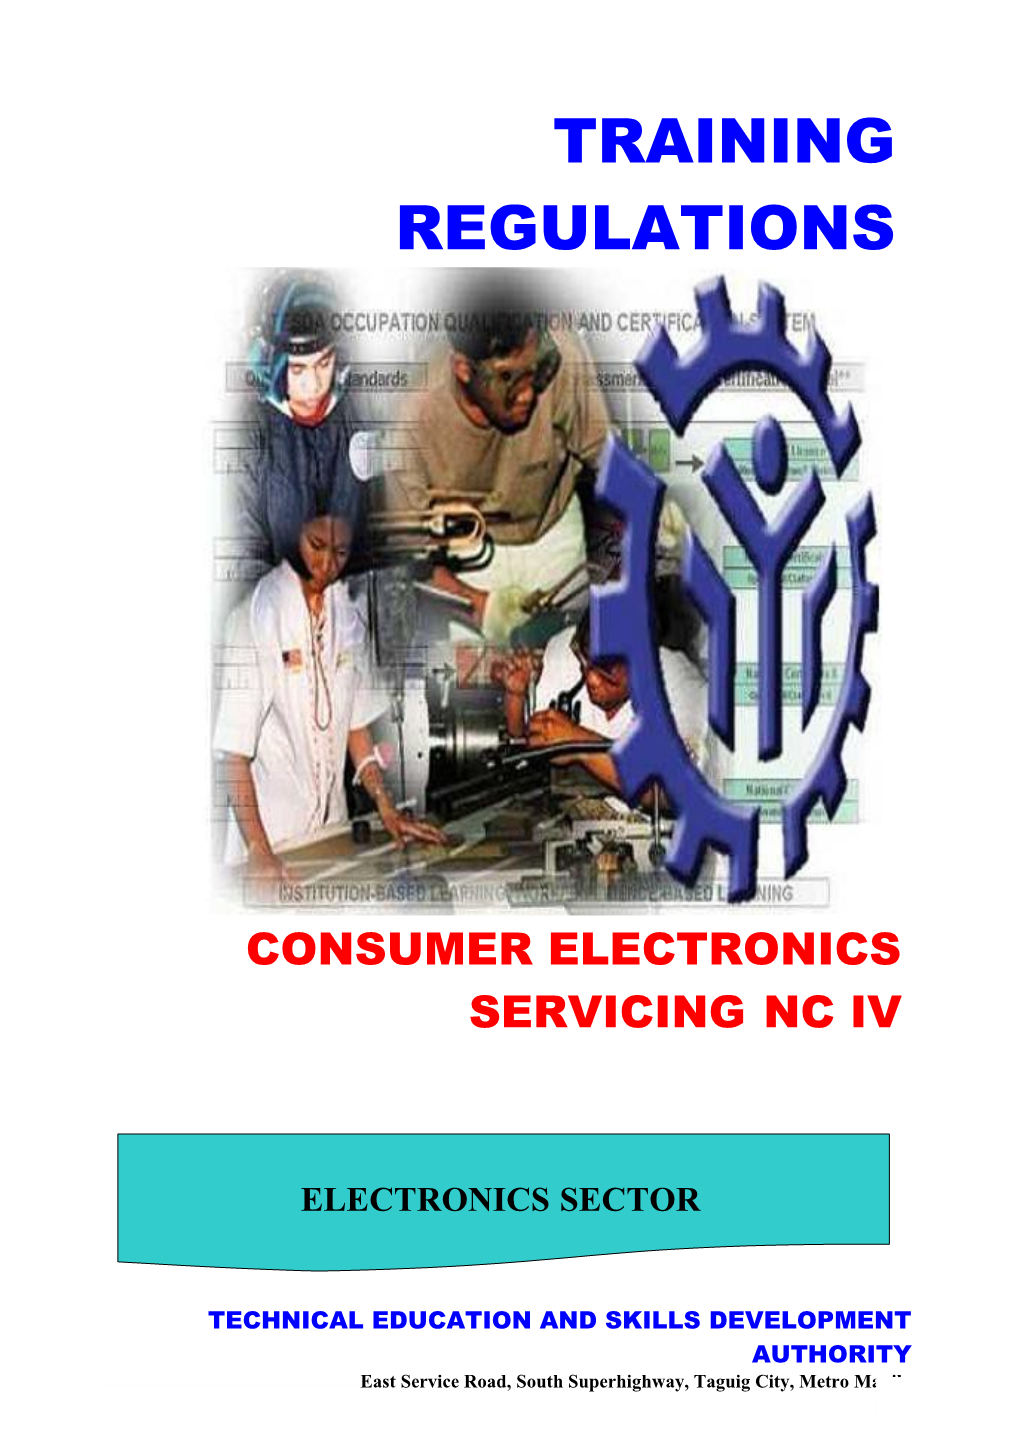 TRAINING REGULATIONS - CONSUMER ELECTRONICS SERVICING NC IV Page 2